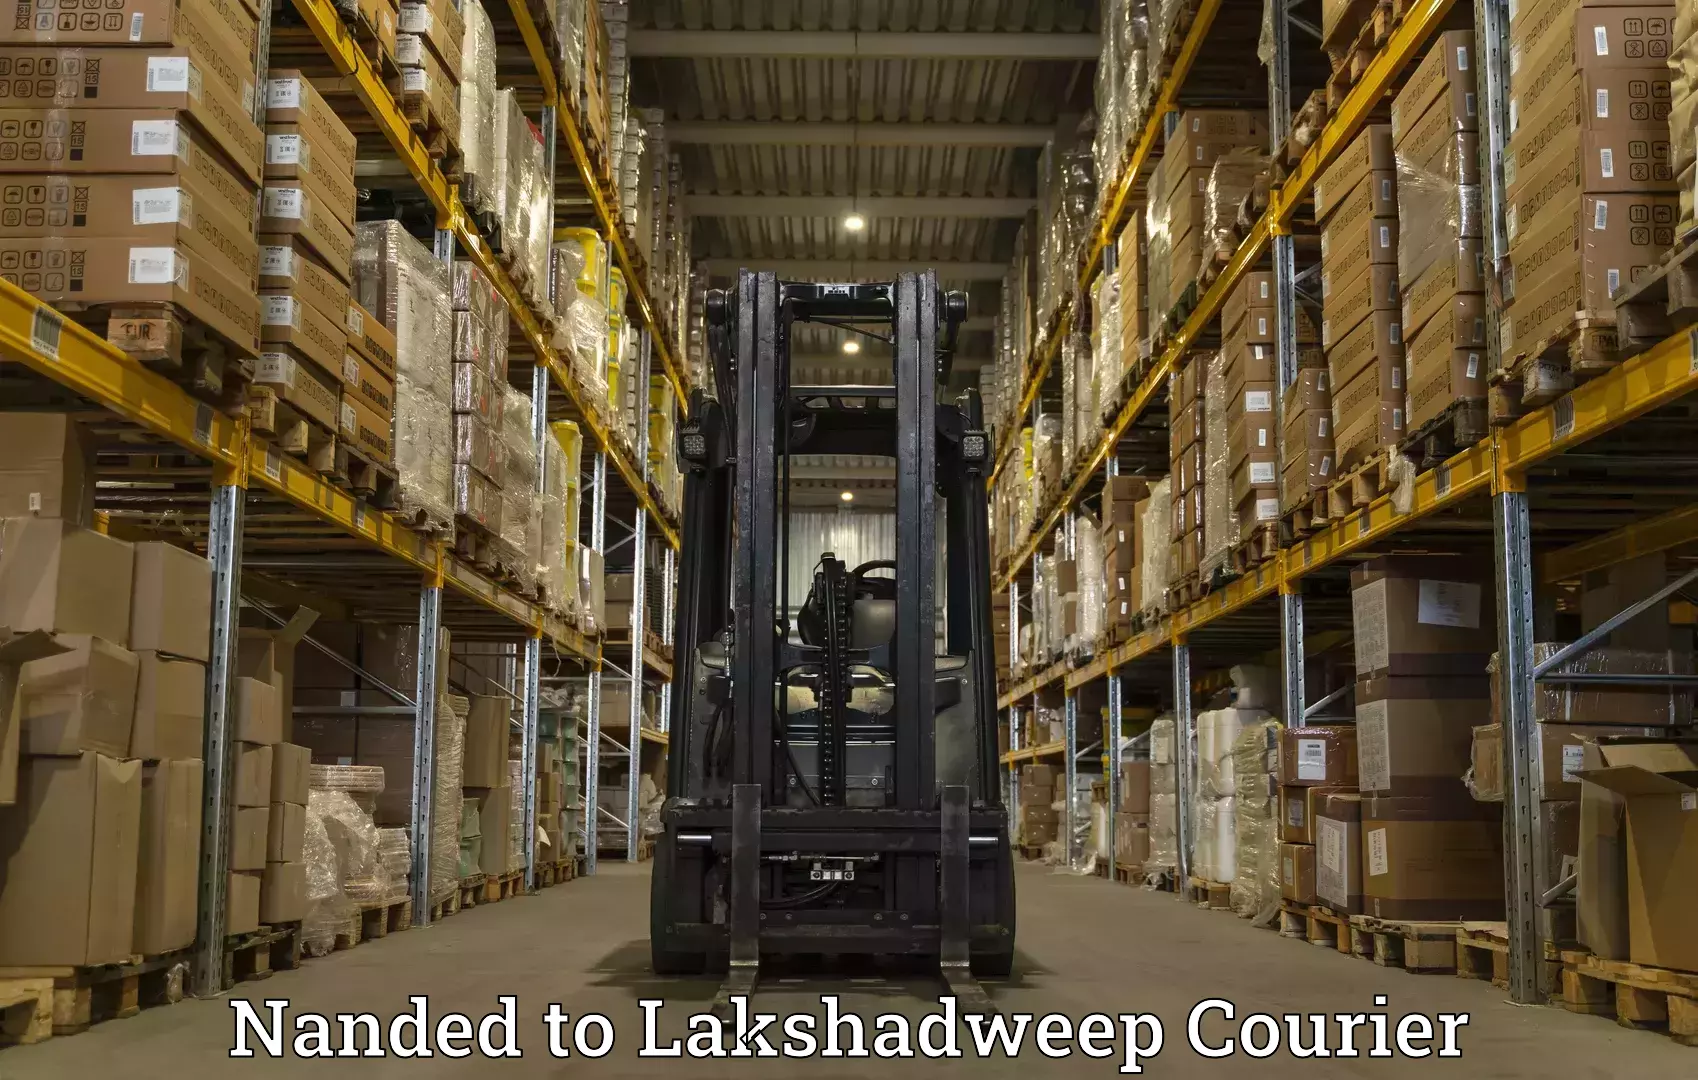 Express logistics providers Nanded to Lakshadweep